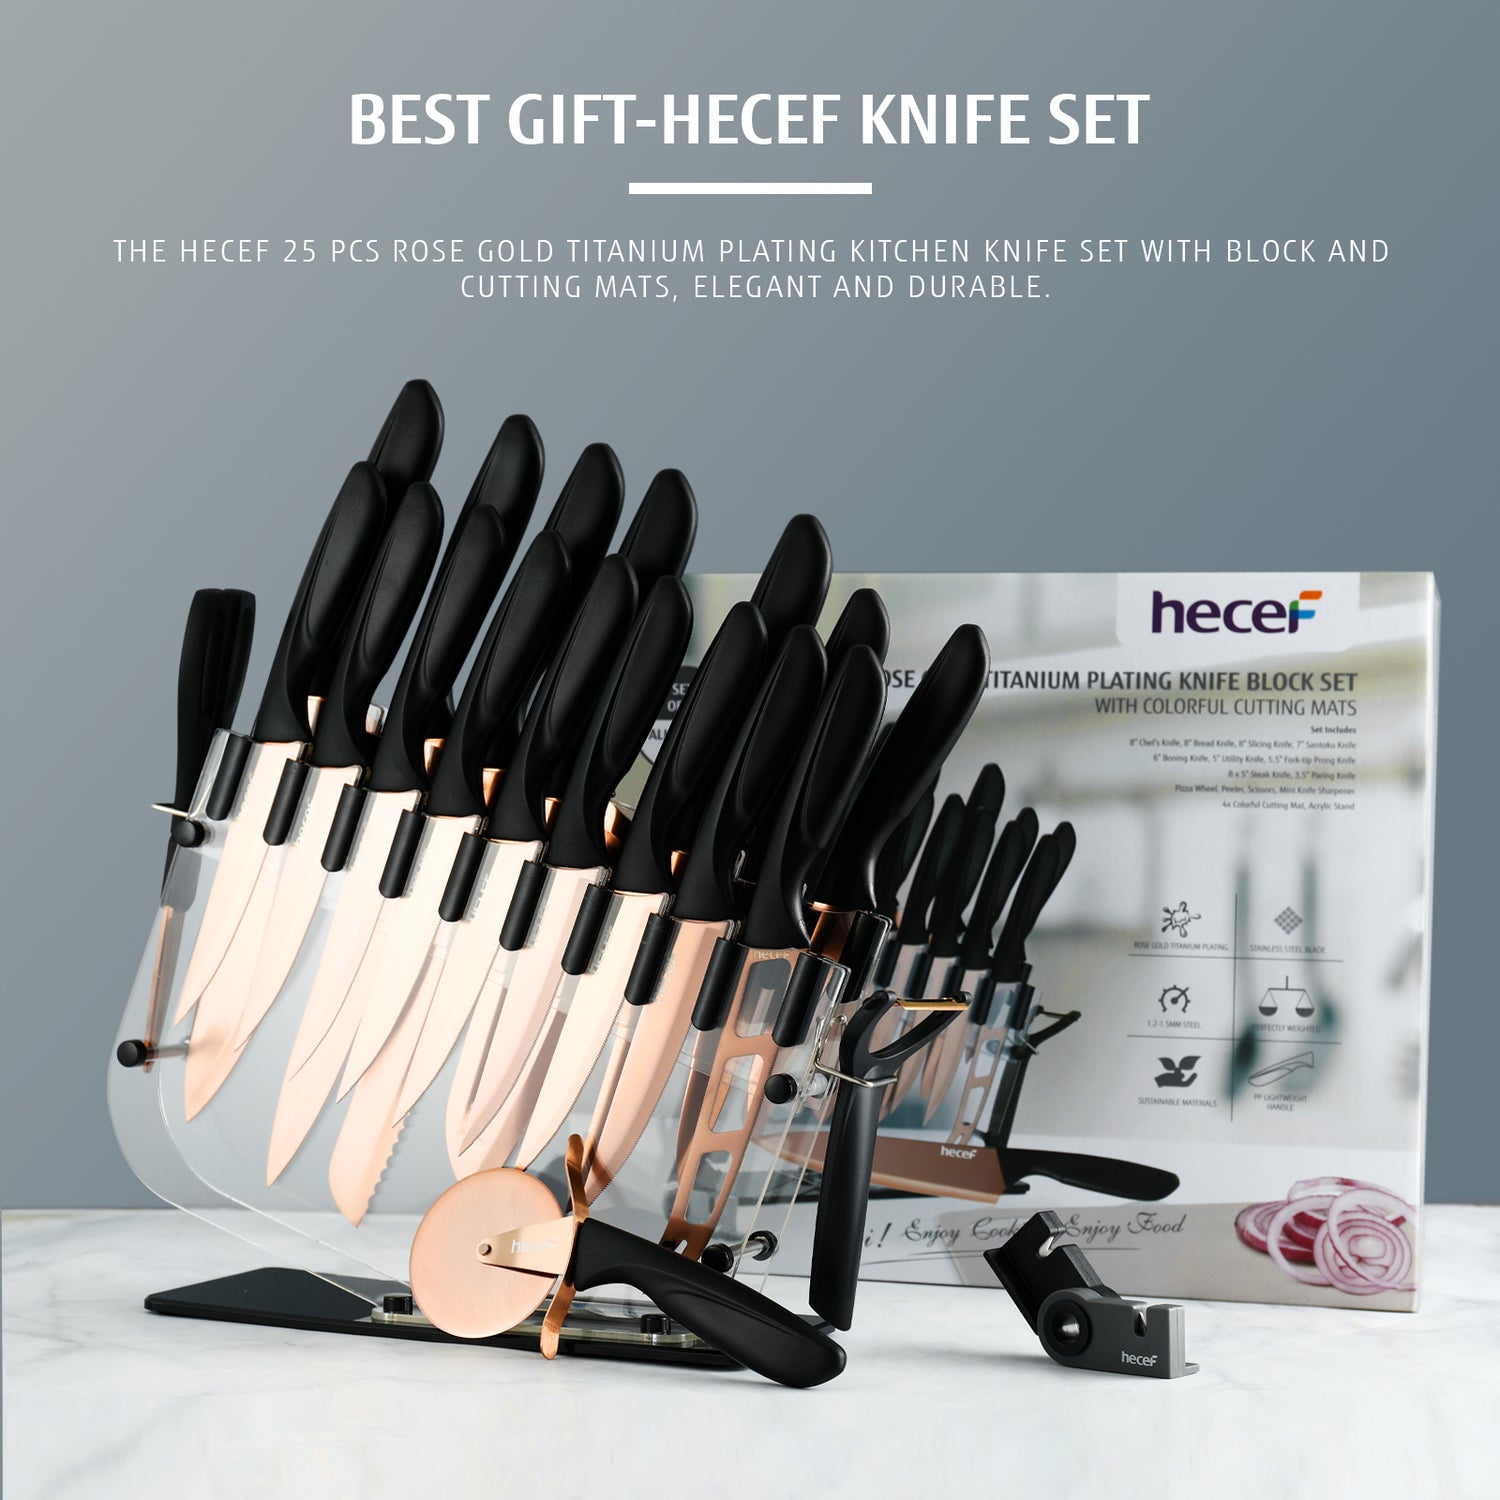 hecef 25 PCS Rose Gold Titanium Plated Kitchen Knife Set with Block and Cutting Mats, Cutlery Knife Set with Sharp Serrated Steak Knives, Boning Knife, Scissors, Sharpener, Peeler and Acrylic Stand - Hecef Kitchen